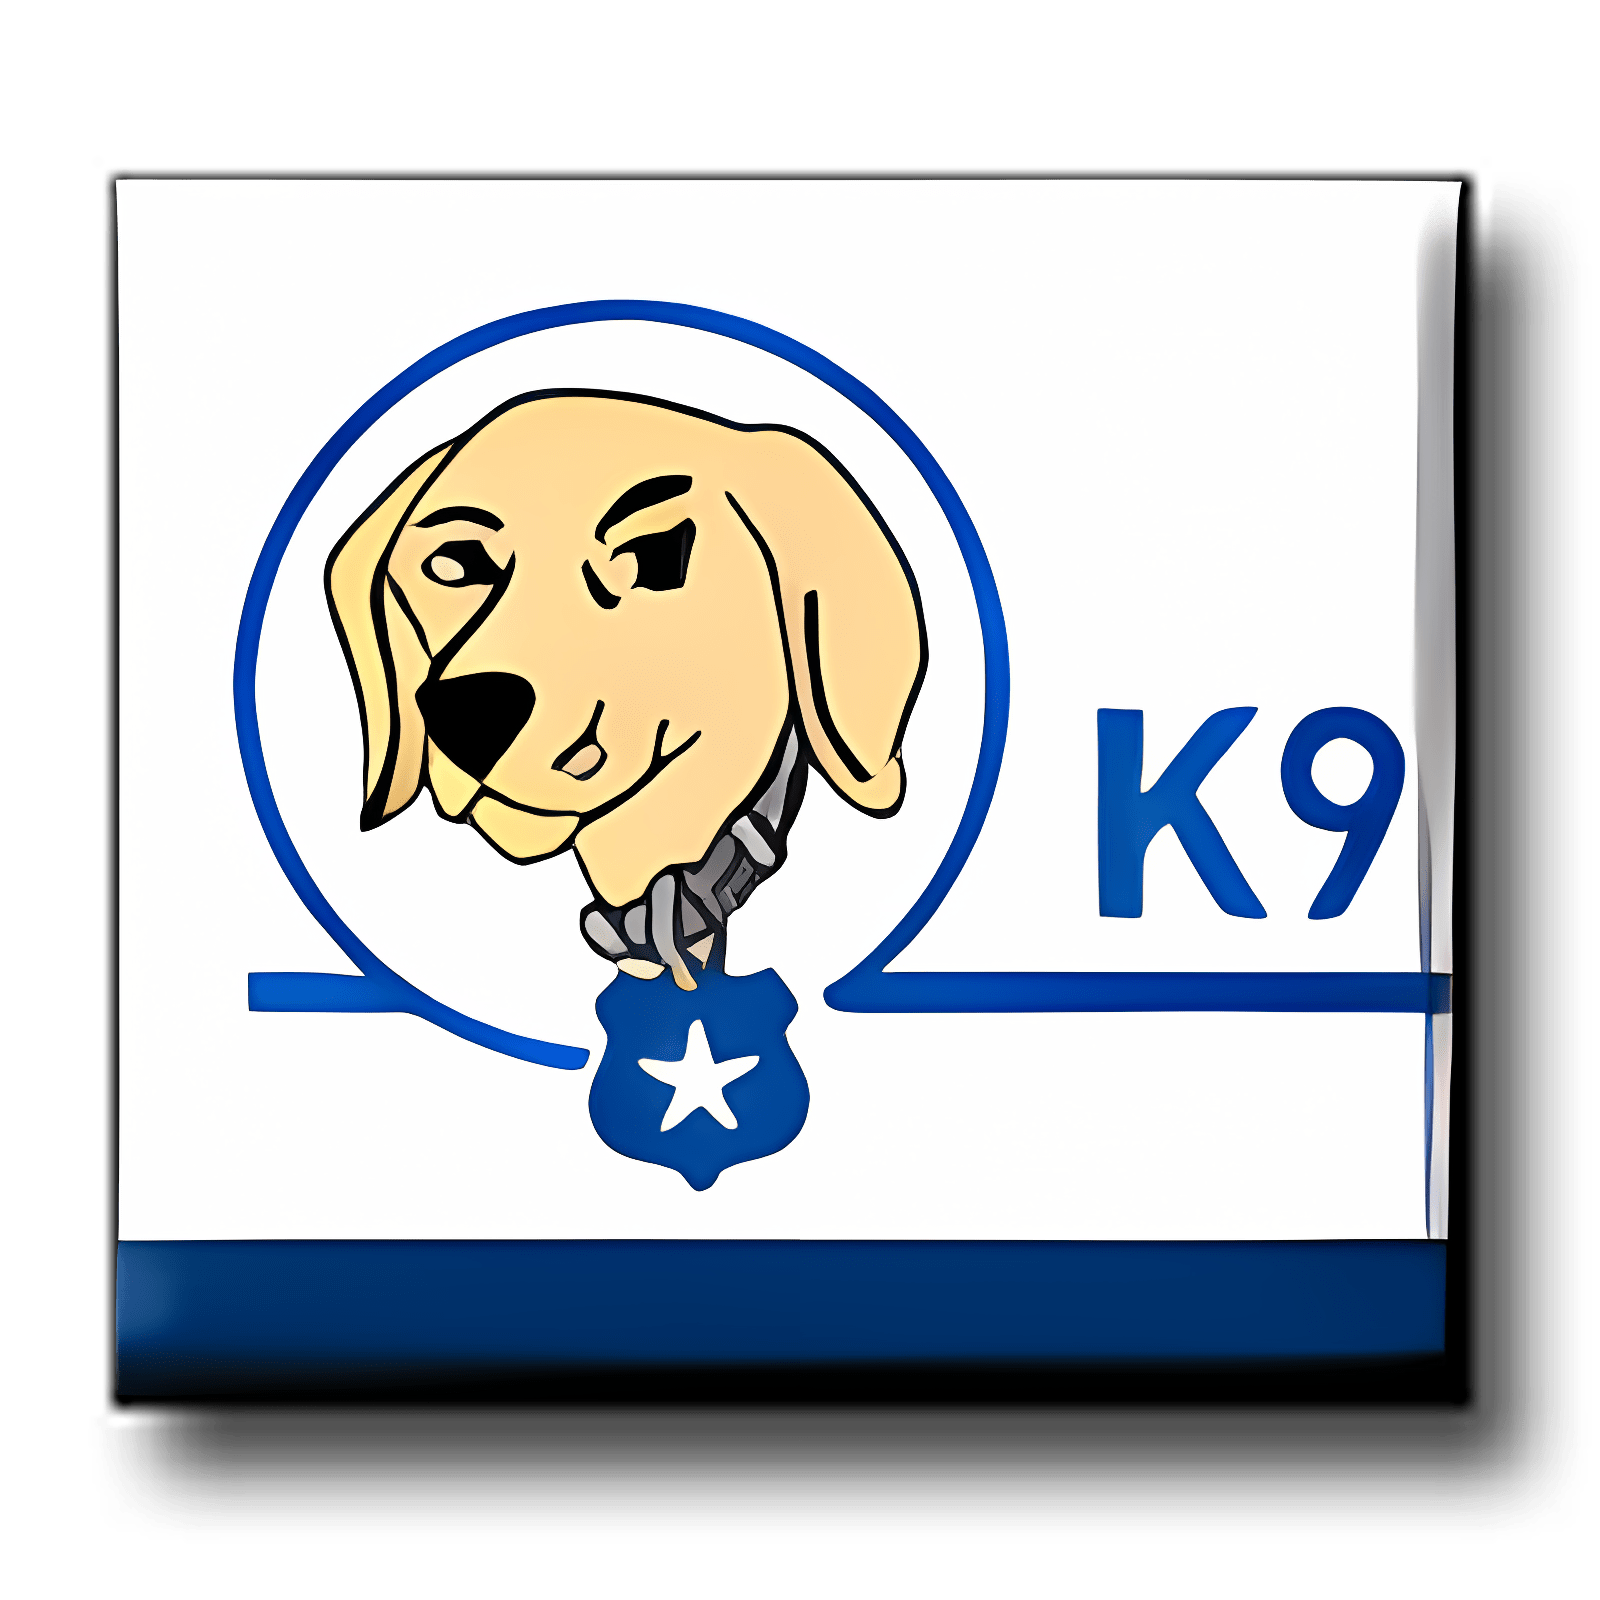 install k9 web protection